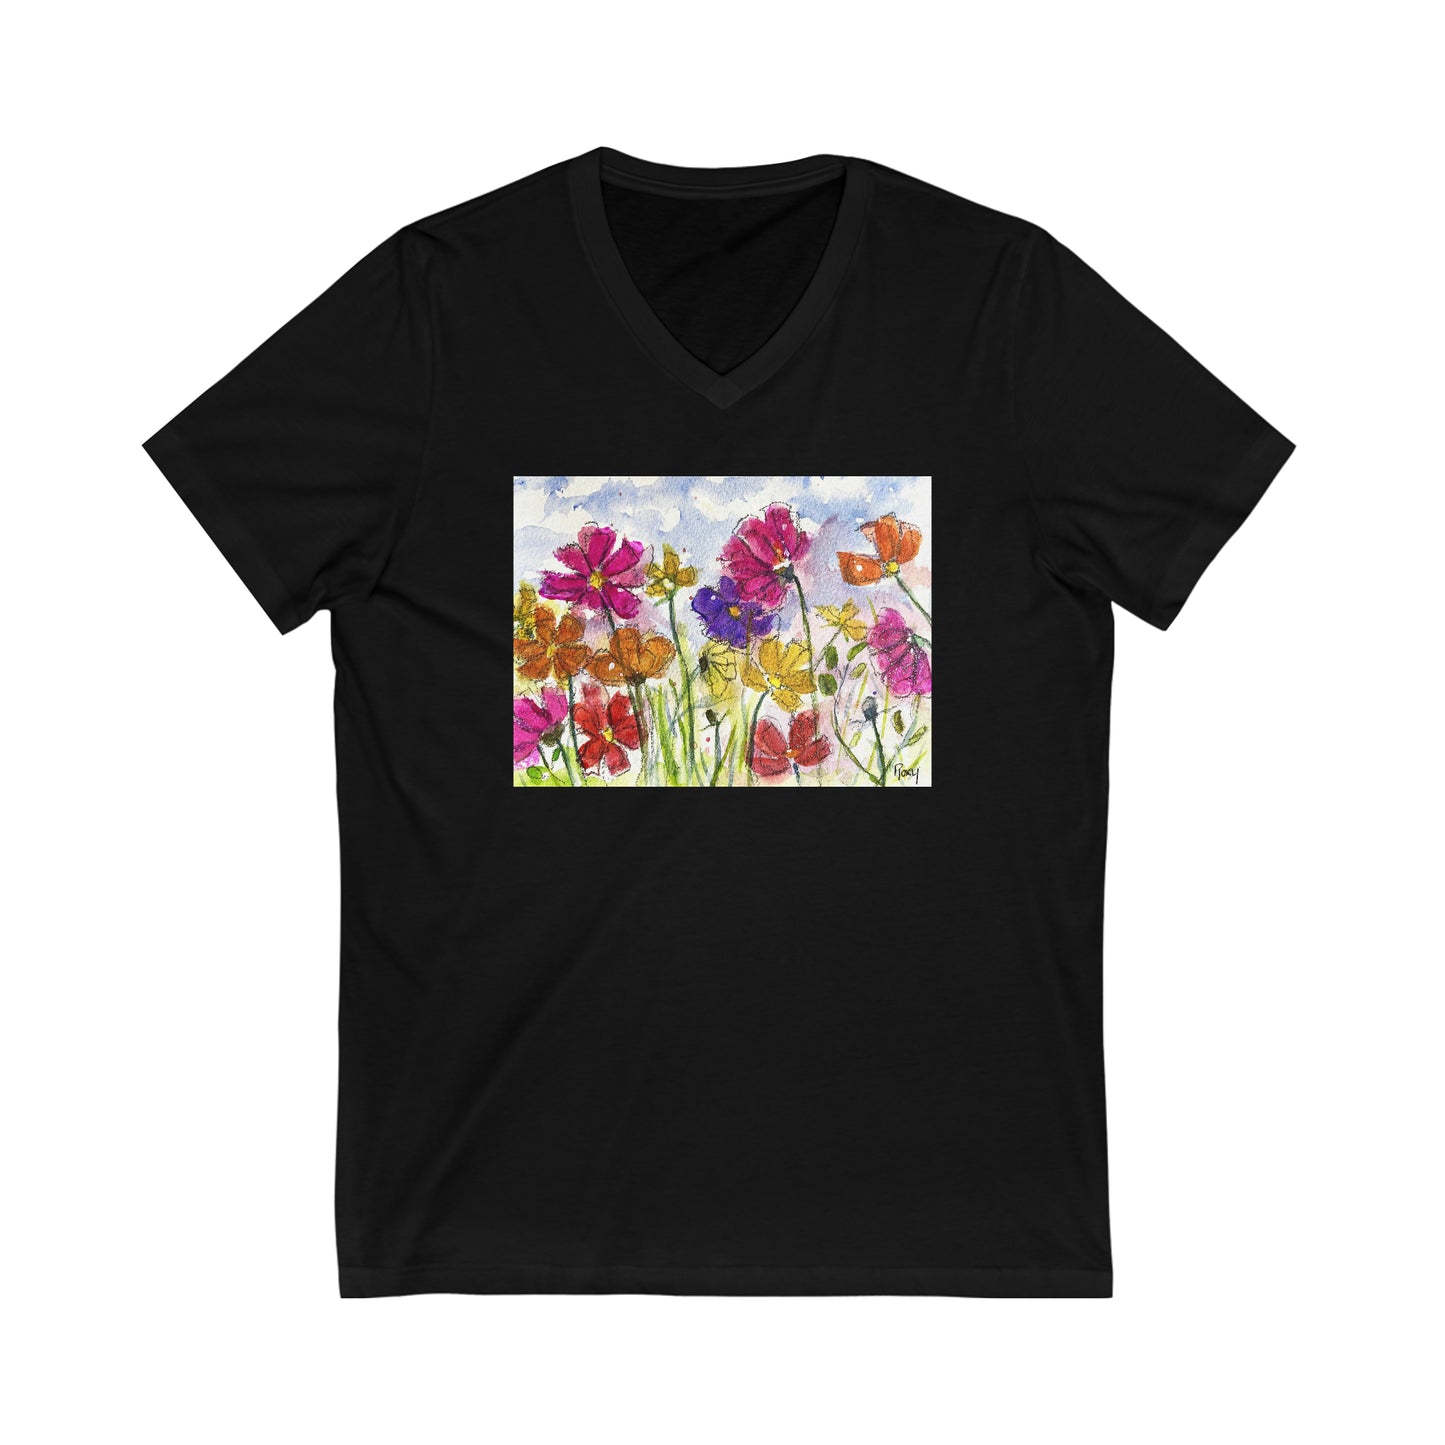 Cosmos Flowers-Unisexe Jersey Manches courtes Col en V Tee